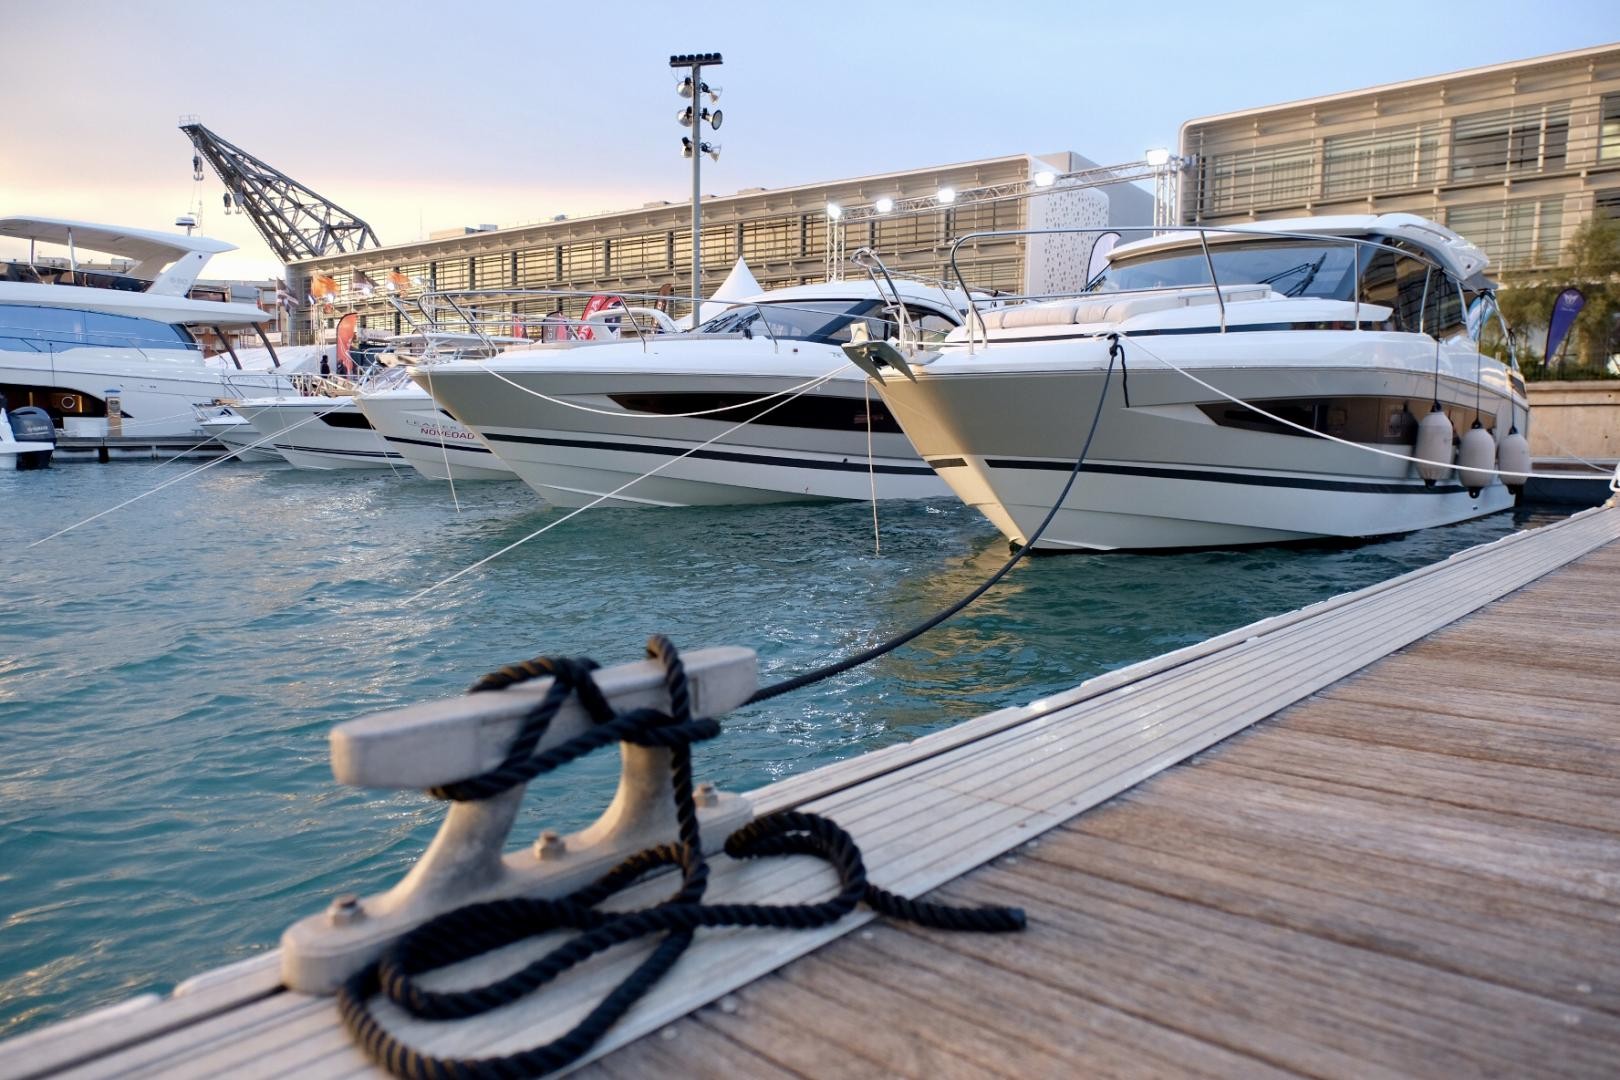 M Yachts joins the Valencia Boat Show